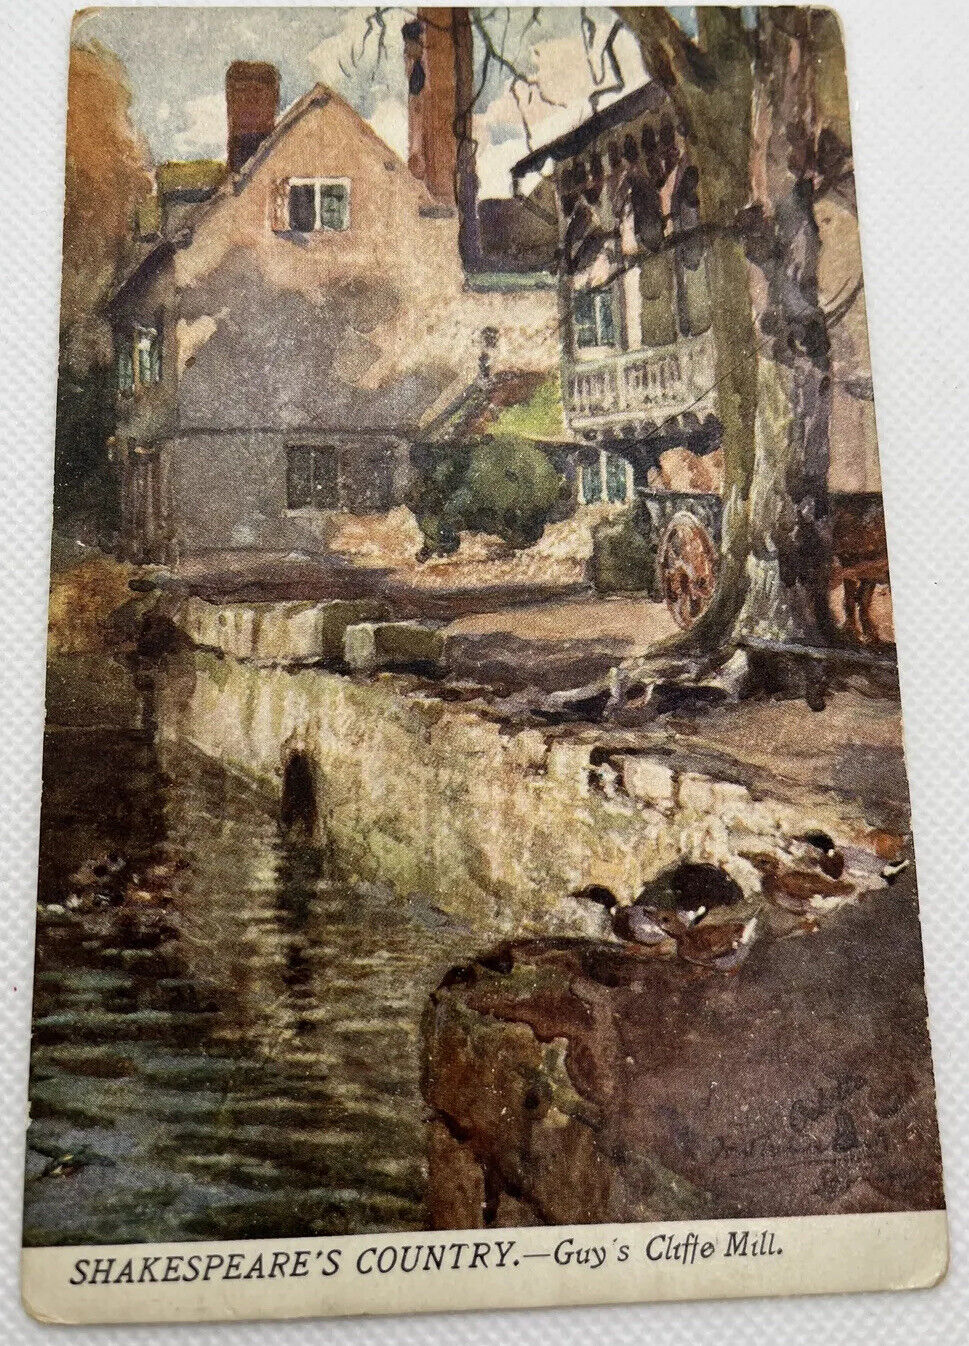 Vintage Tucks Oilette Postcard: Shakespeare’s Country Guys Cliff Mill, SIGNED